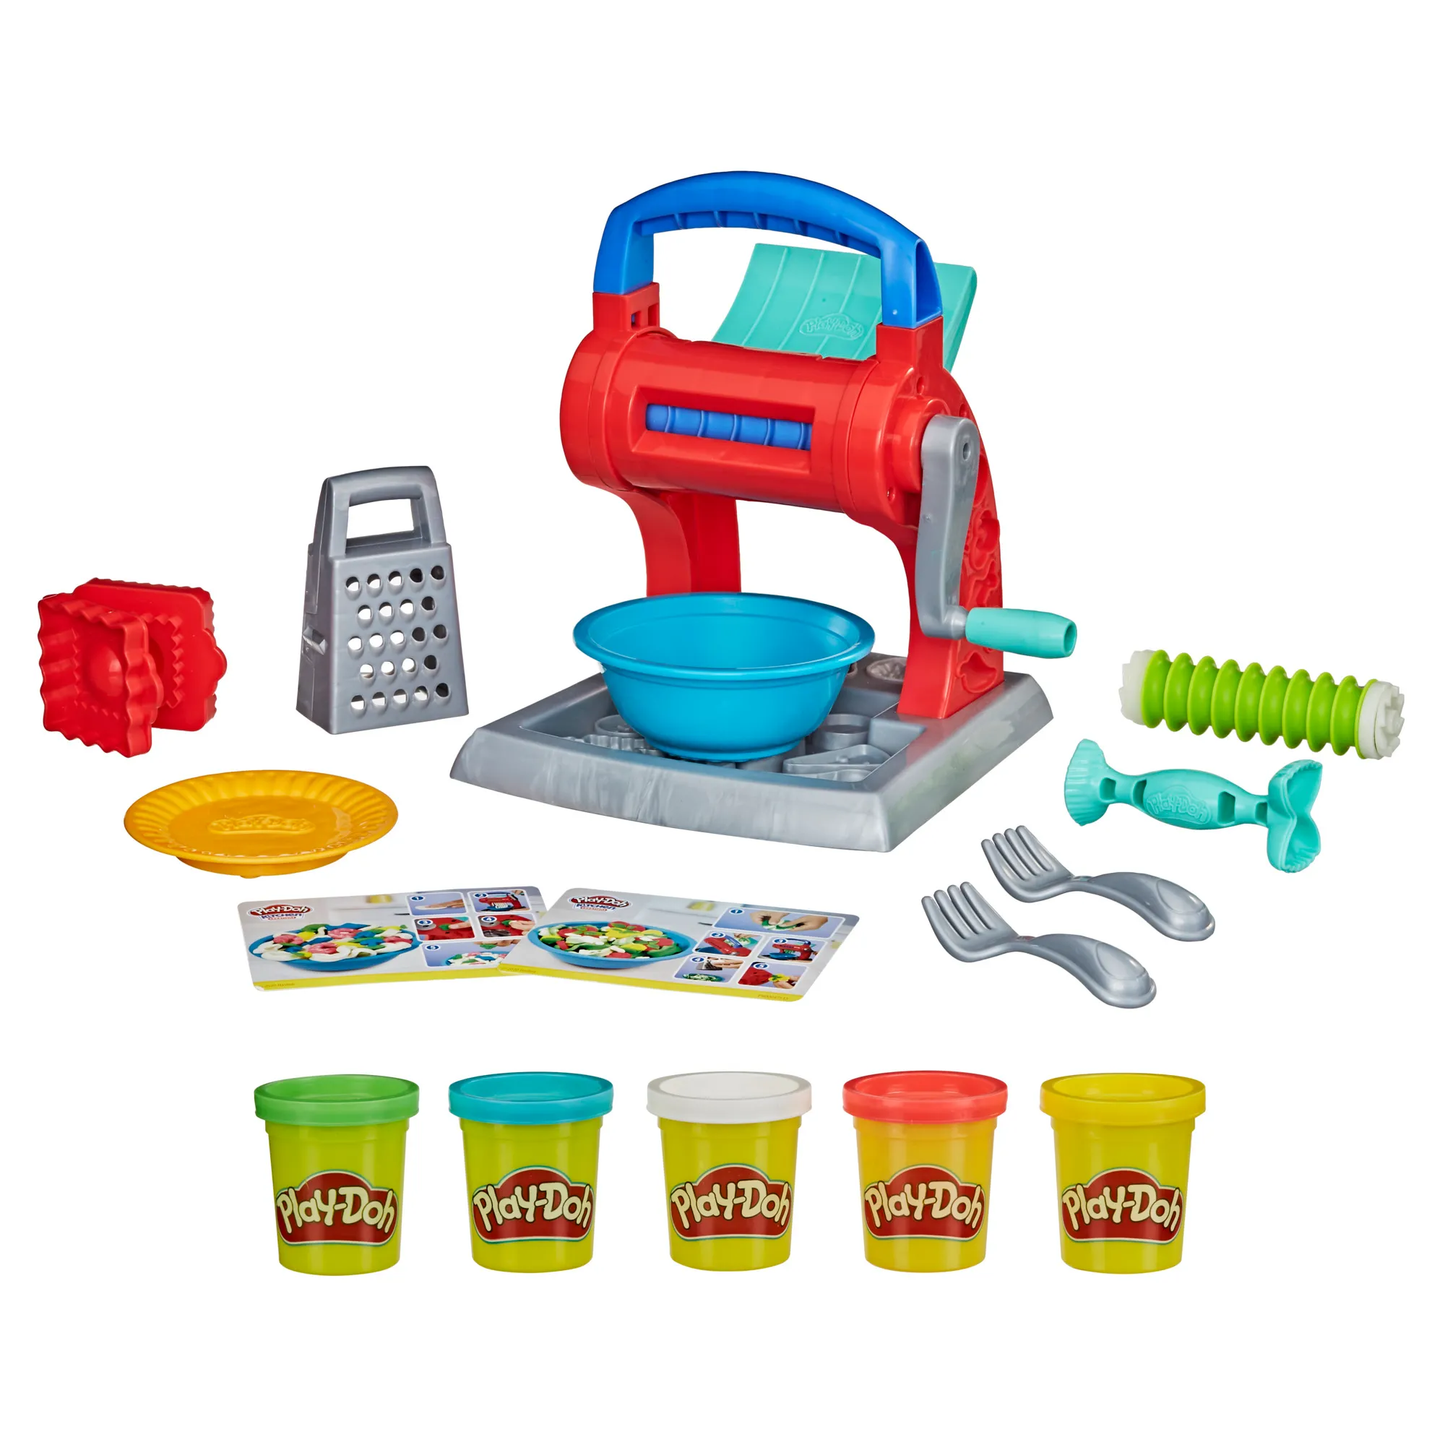 Play-Doh Kitchen Creations - Noodle Party